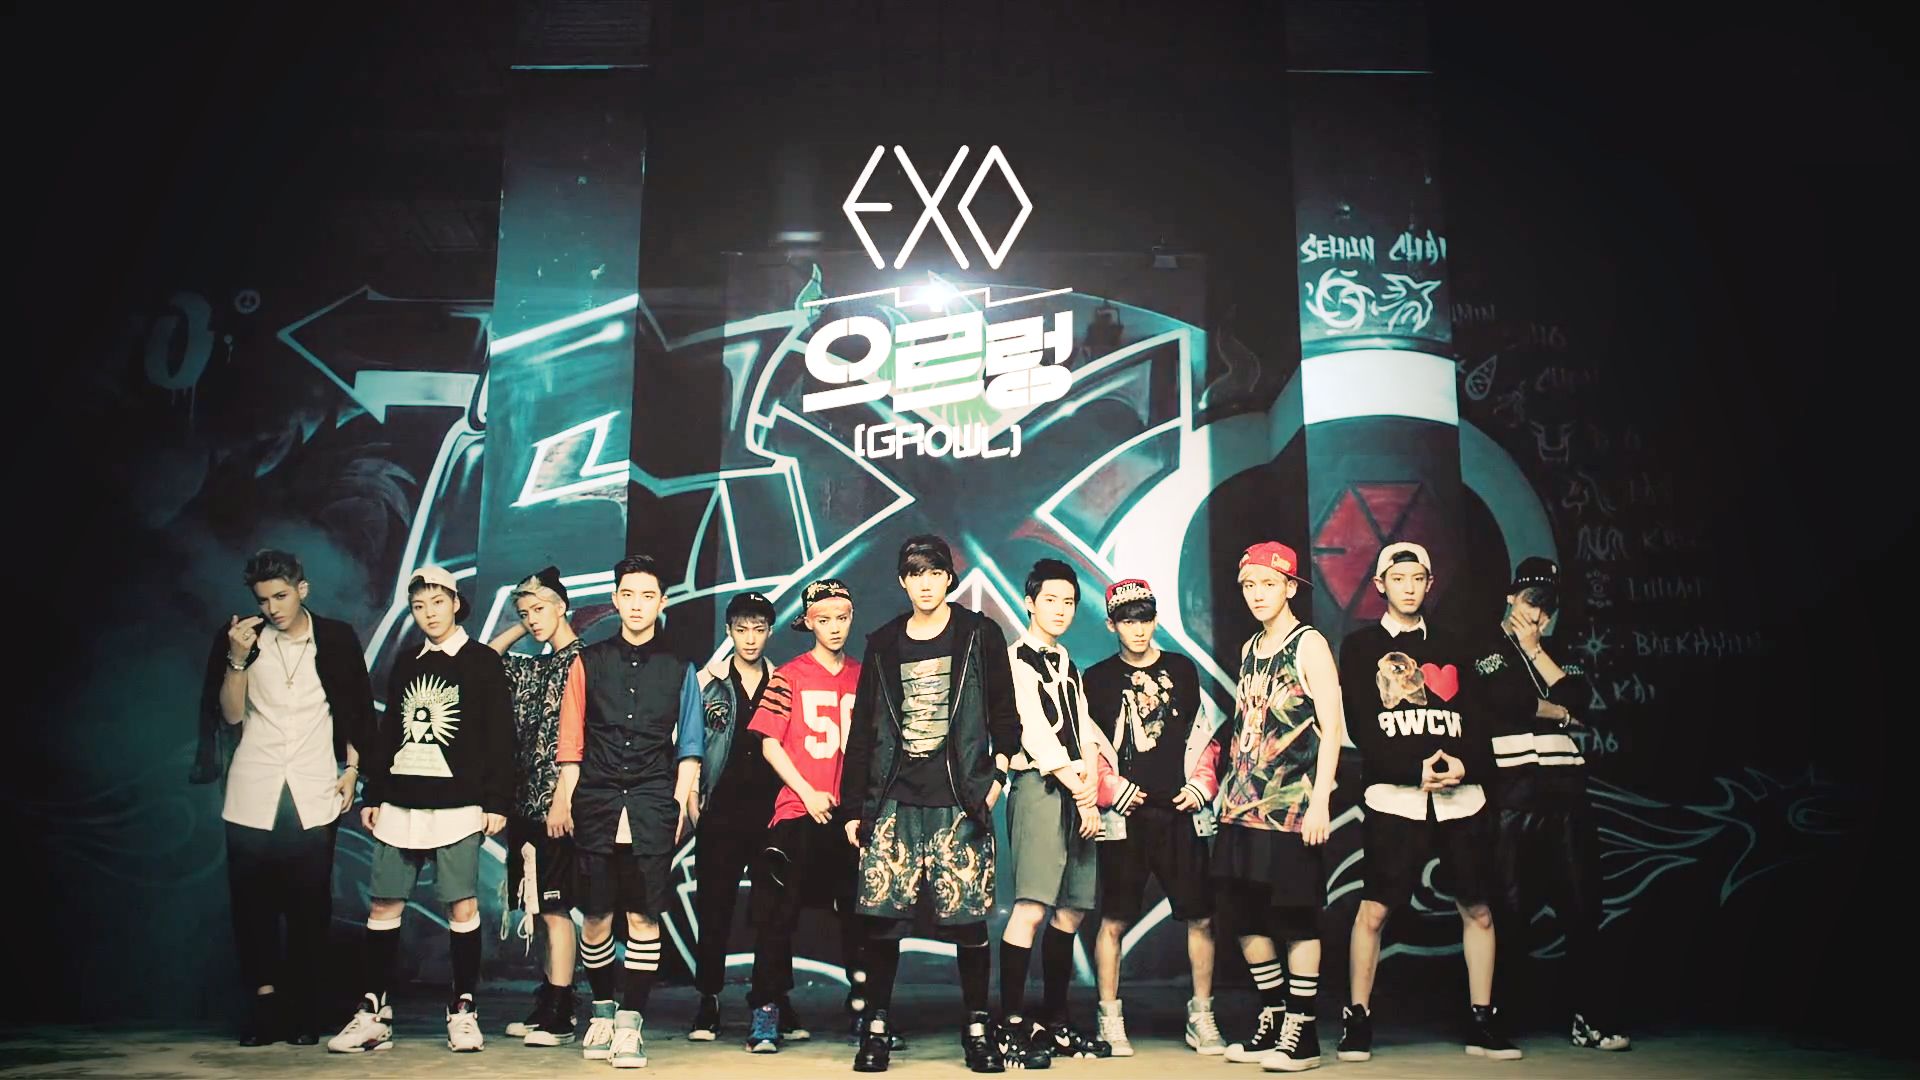 Exo wallpapers for desktop, download free Exo pictures and backgrounds for  PC 